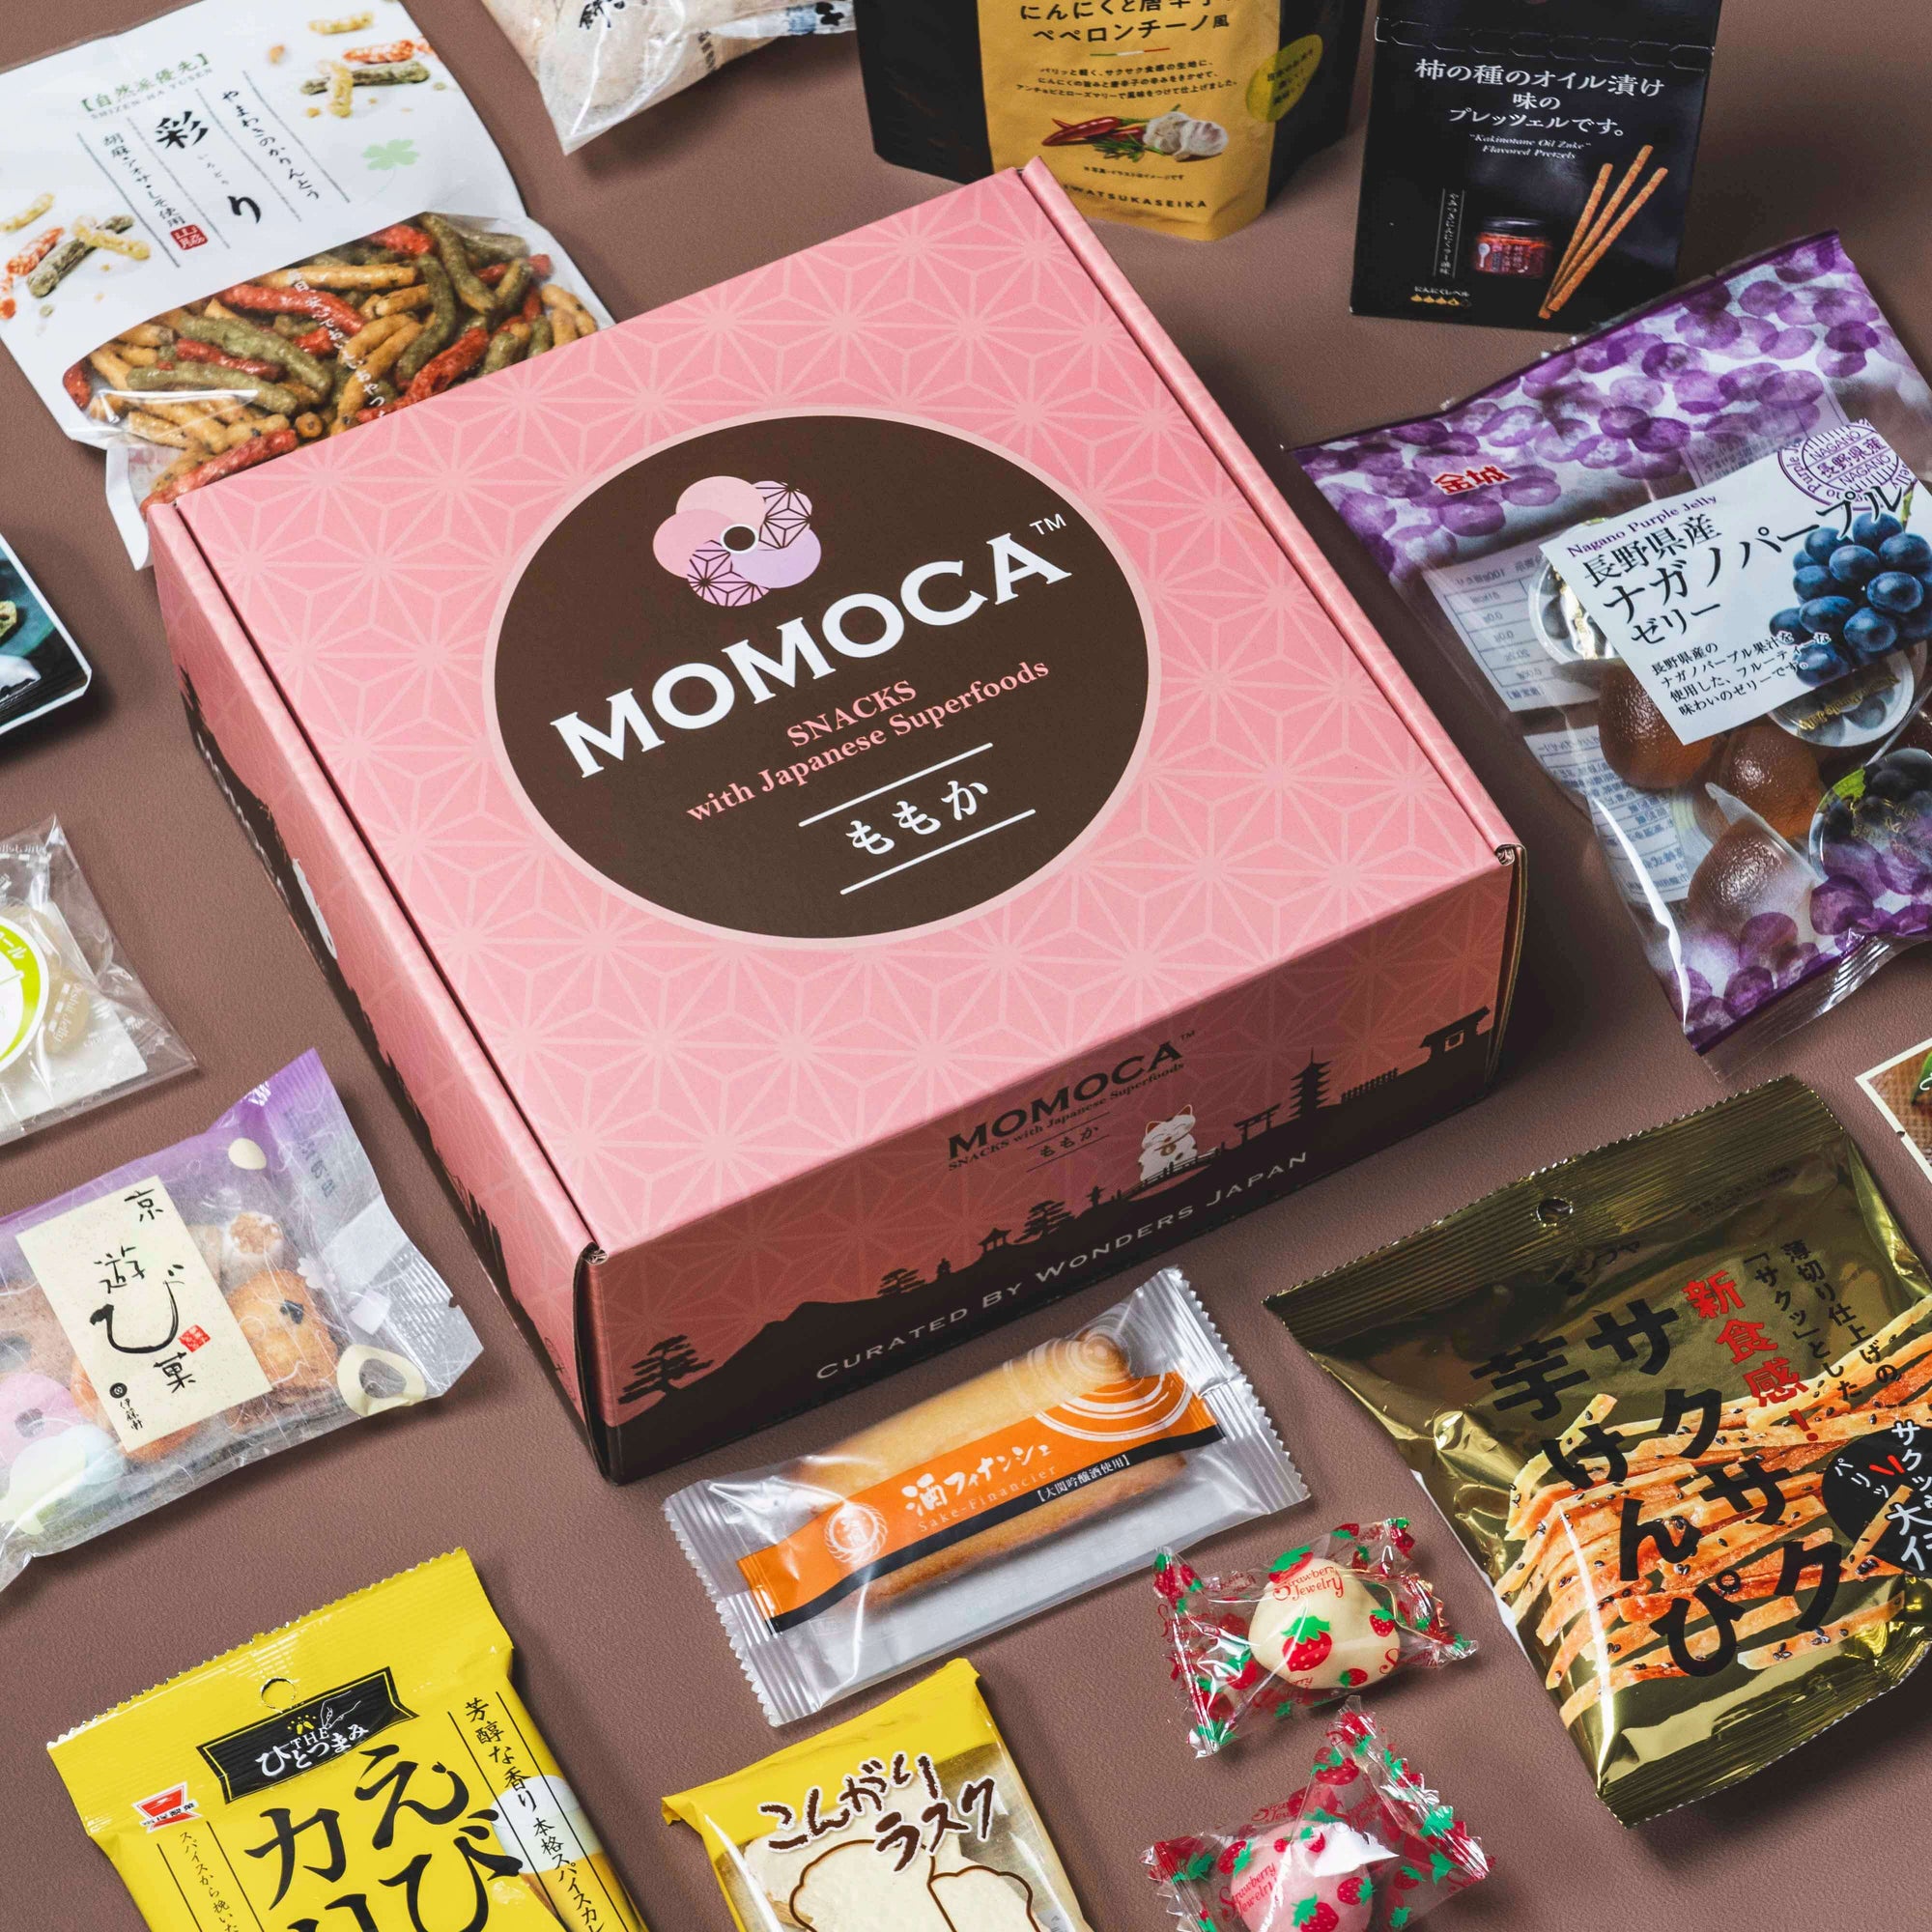 A pink Momoca Wellness Welcome Subscription Box filled with various authentic Japanese snacks and candies is open, displaying its contents on a brown background. A small black dish with a round treat is placed beside it.